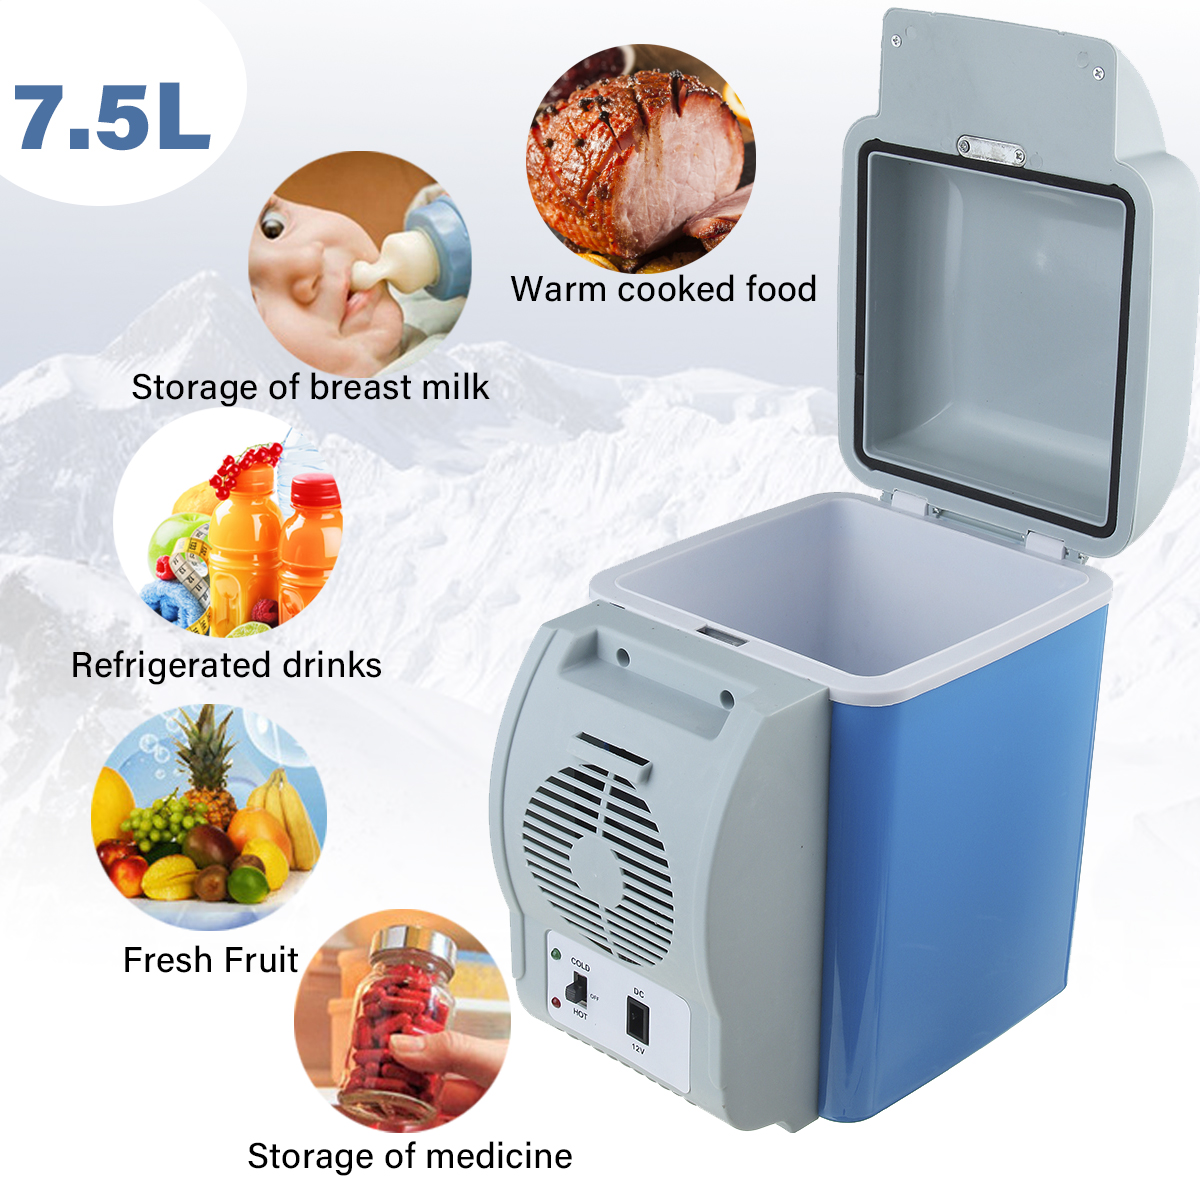 12V-75L-Portable-Vehicle-Refrigerator-Dual-use-Heating--Cooling-Freezer-For-Outdoor-Camping-Travelli-1748753-3